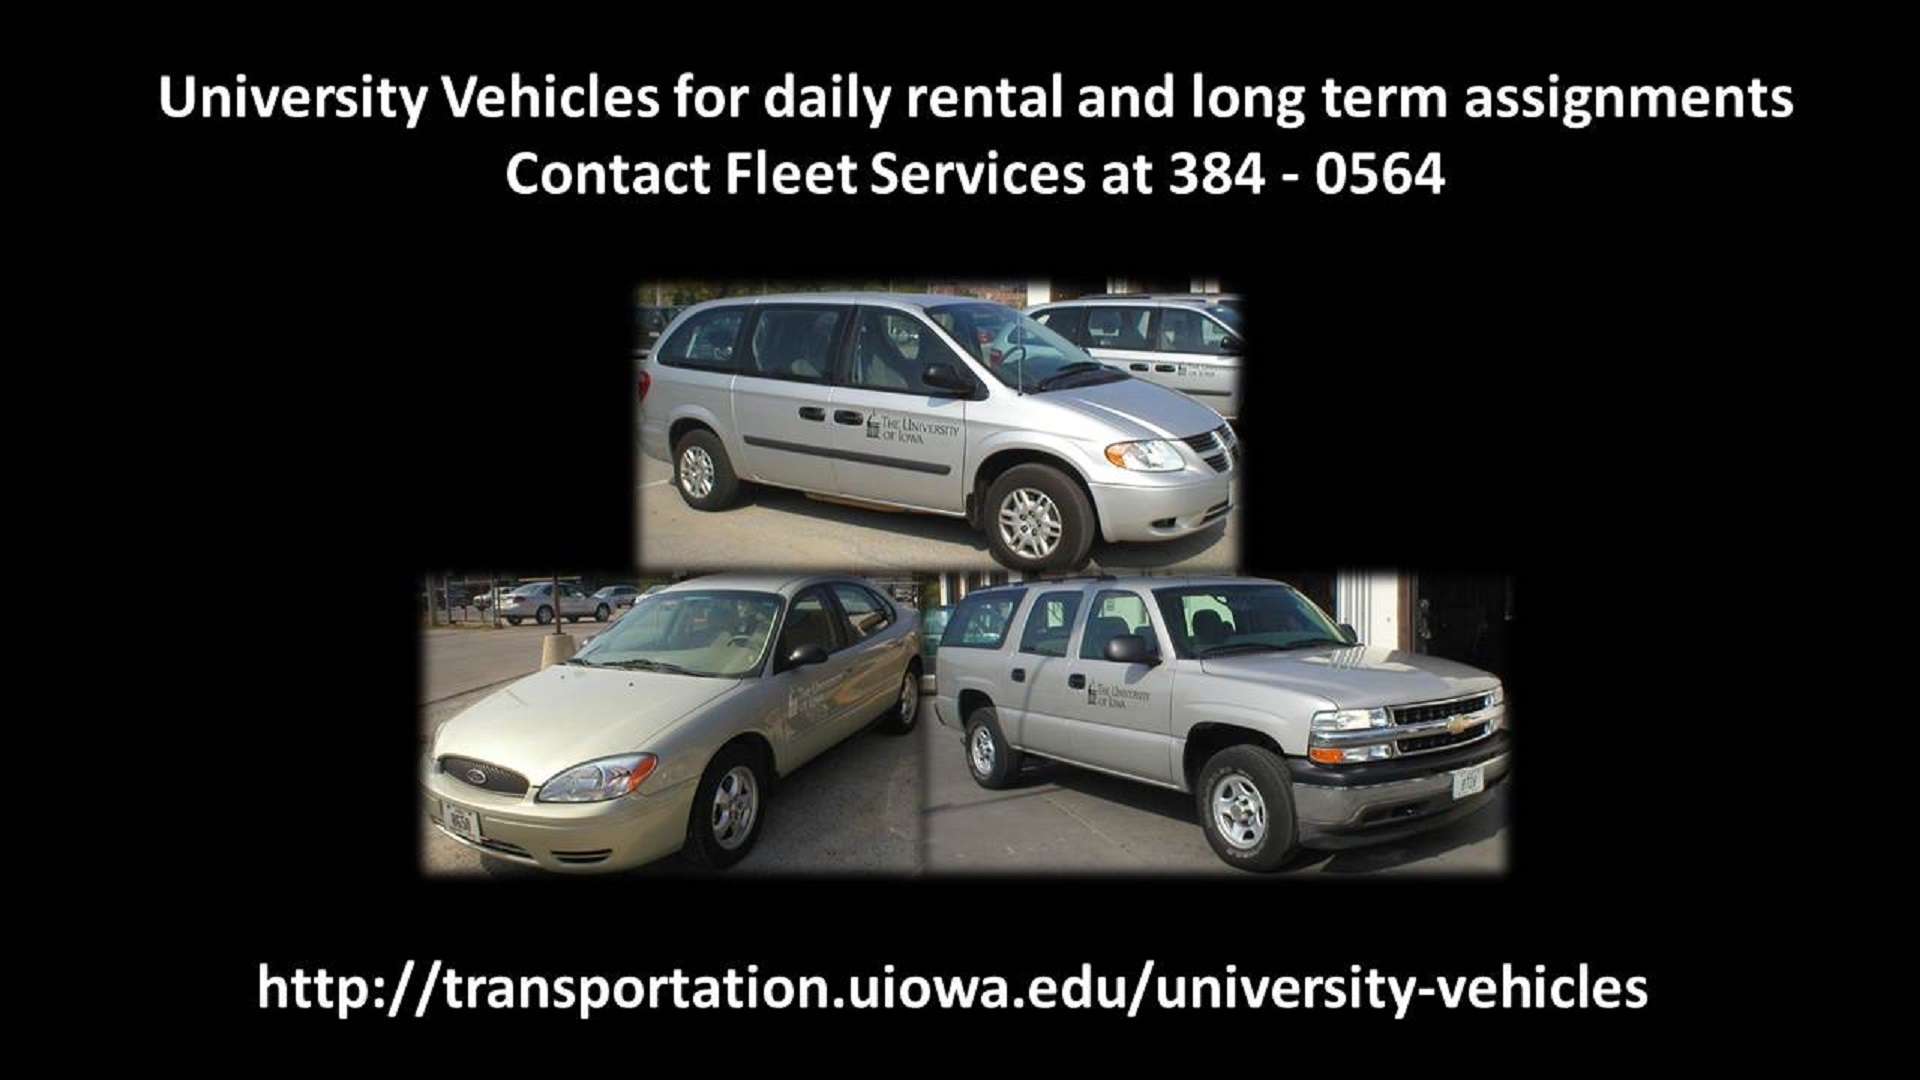 University vehicles are available for daily rental and long term assignments